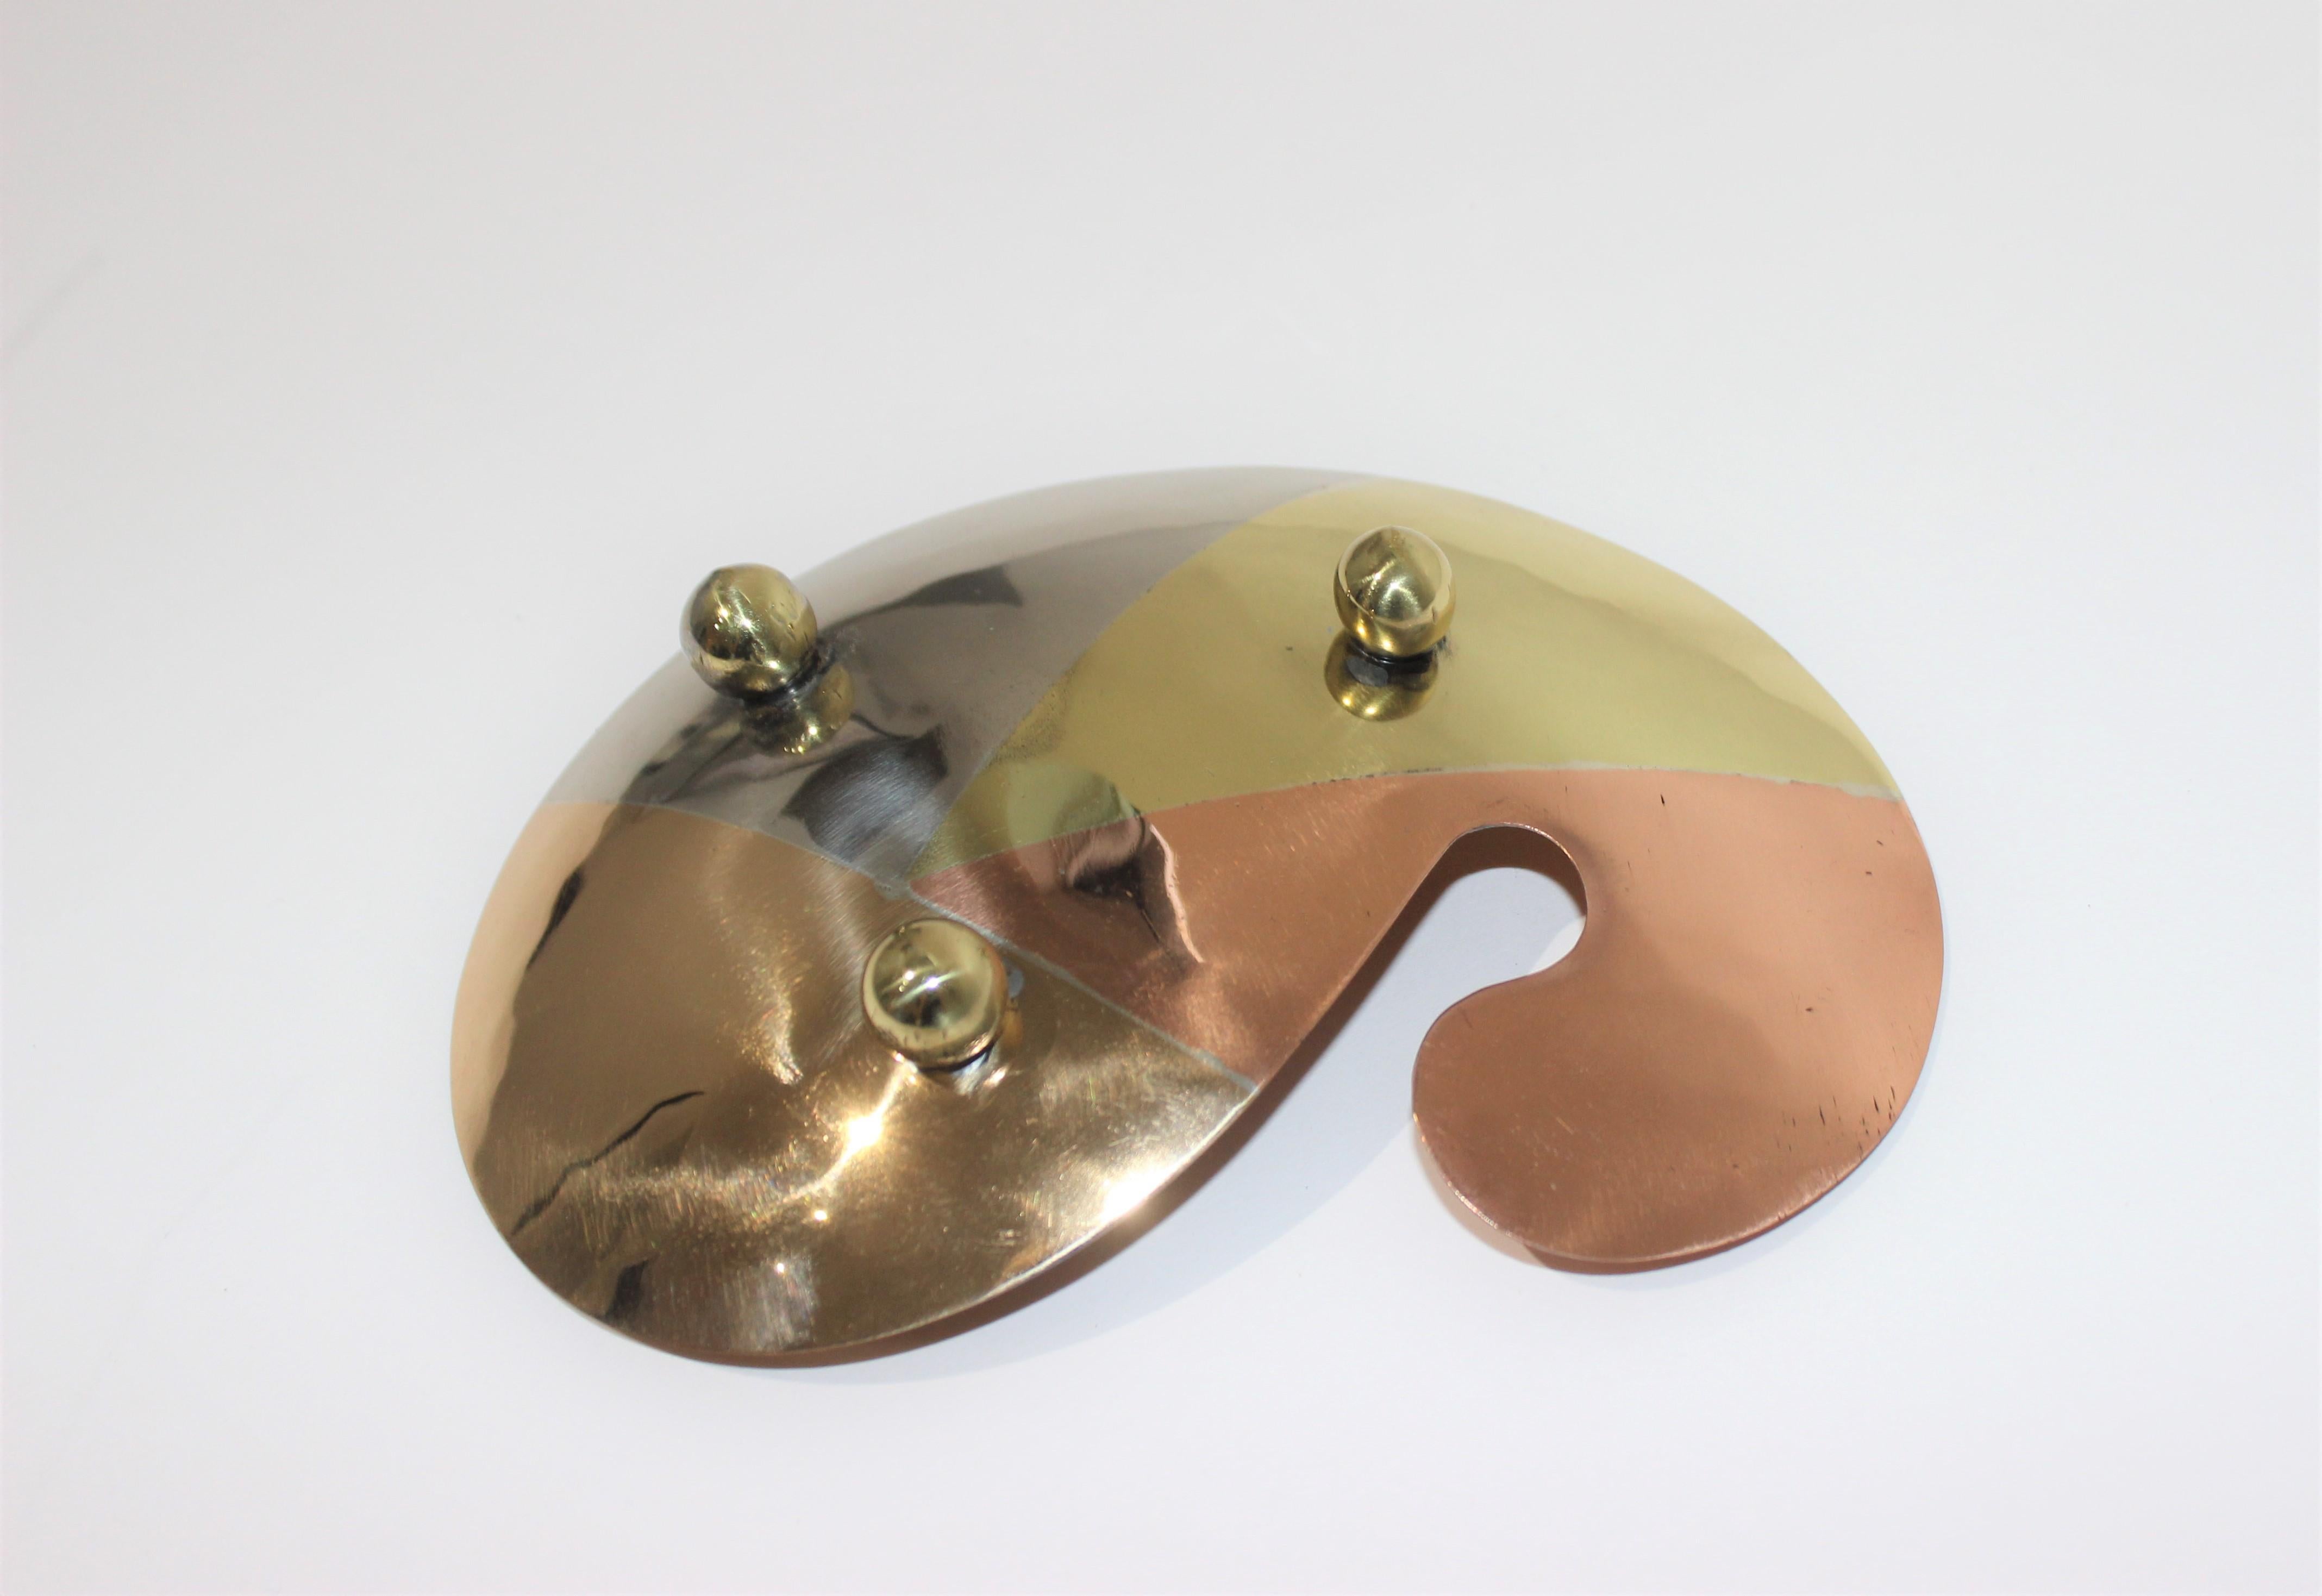 Los Castillo style midcentury mixed metal dish, polished and lacquered bowl from Mexico - from a Palm Beach estate.